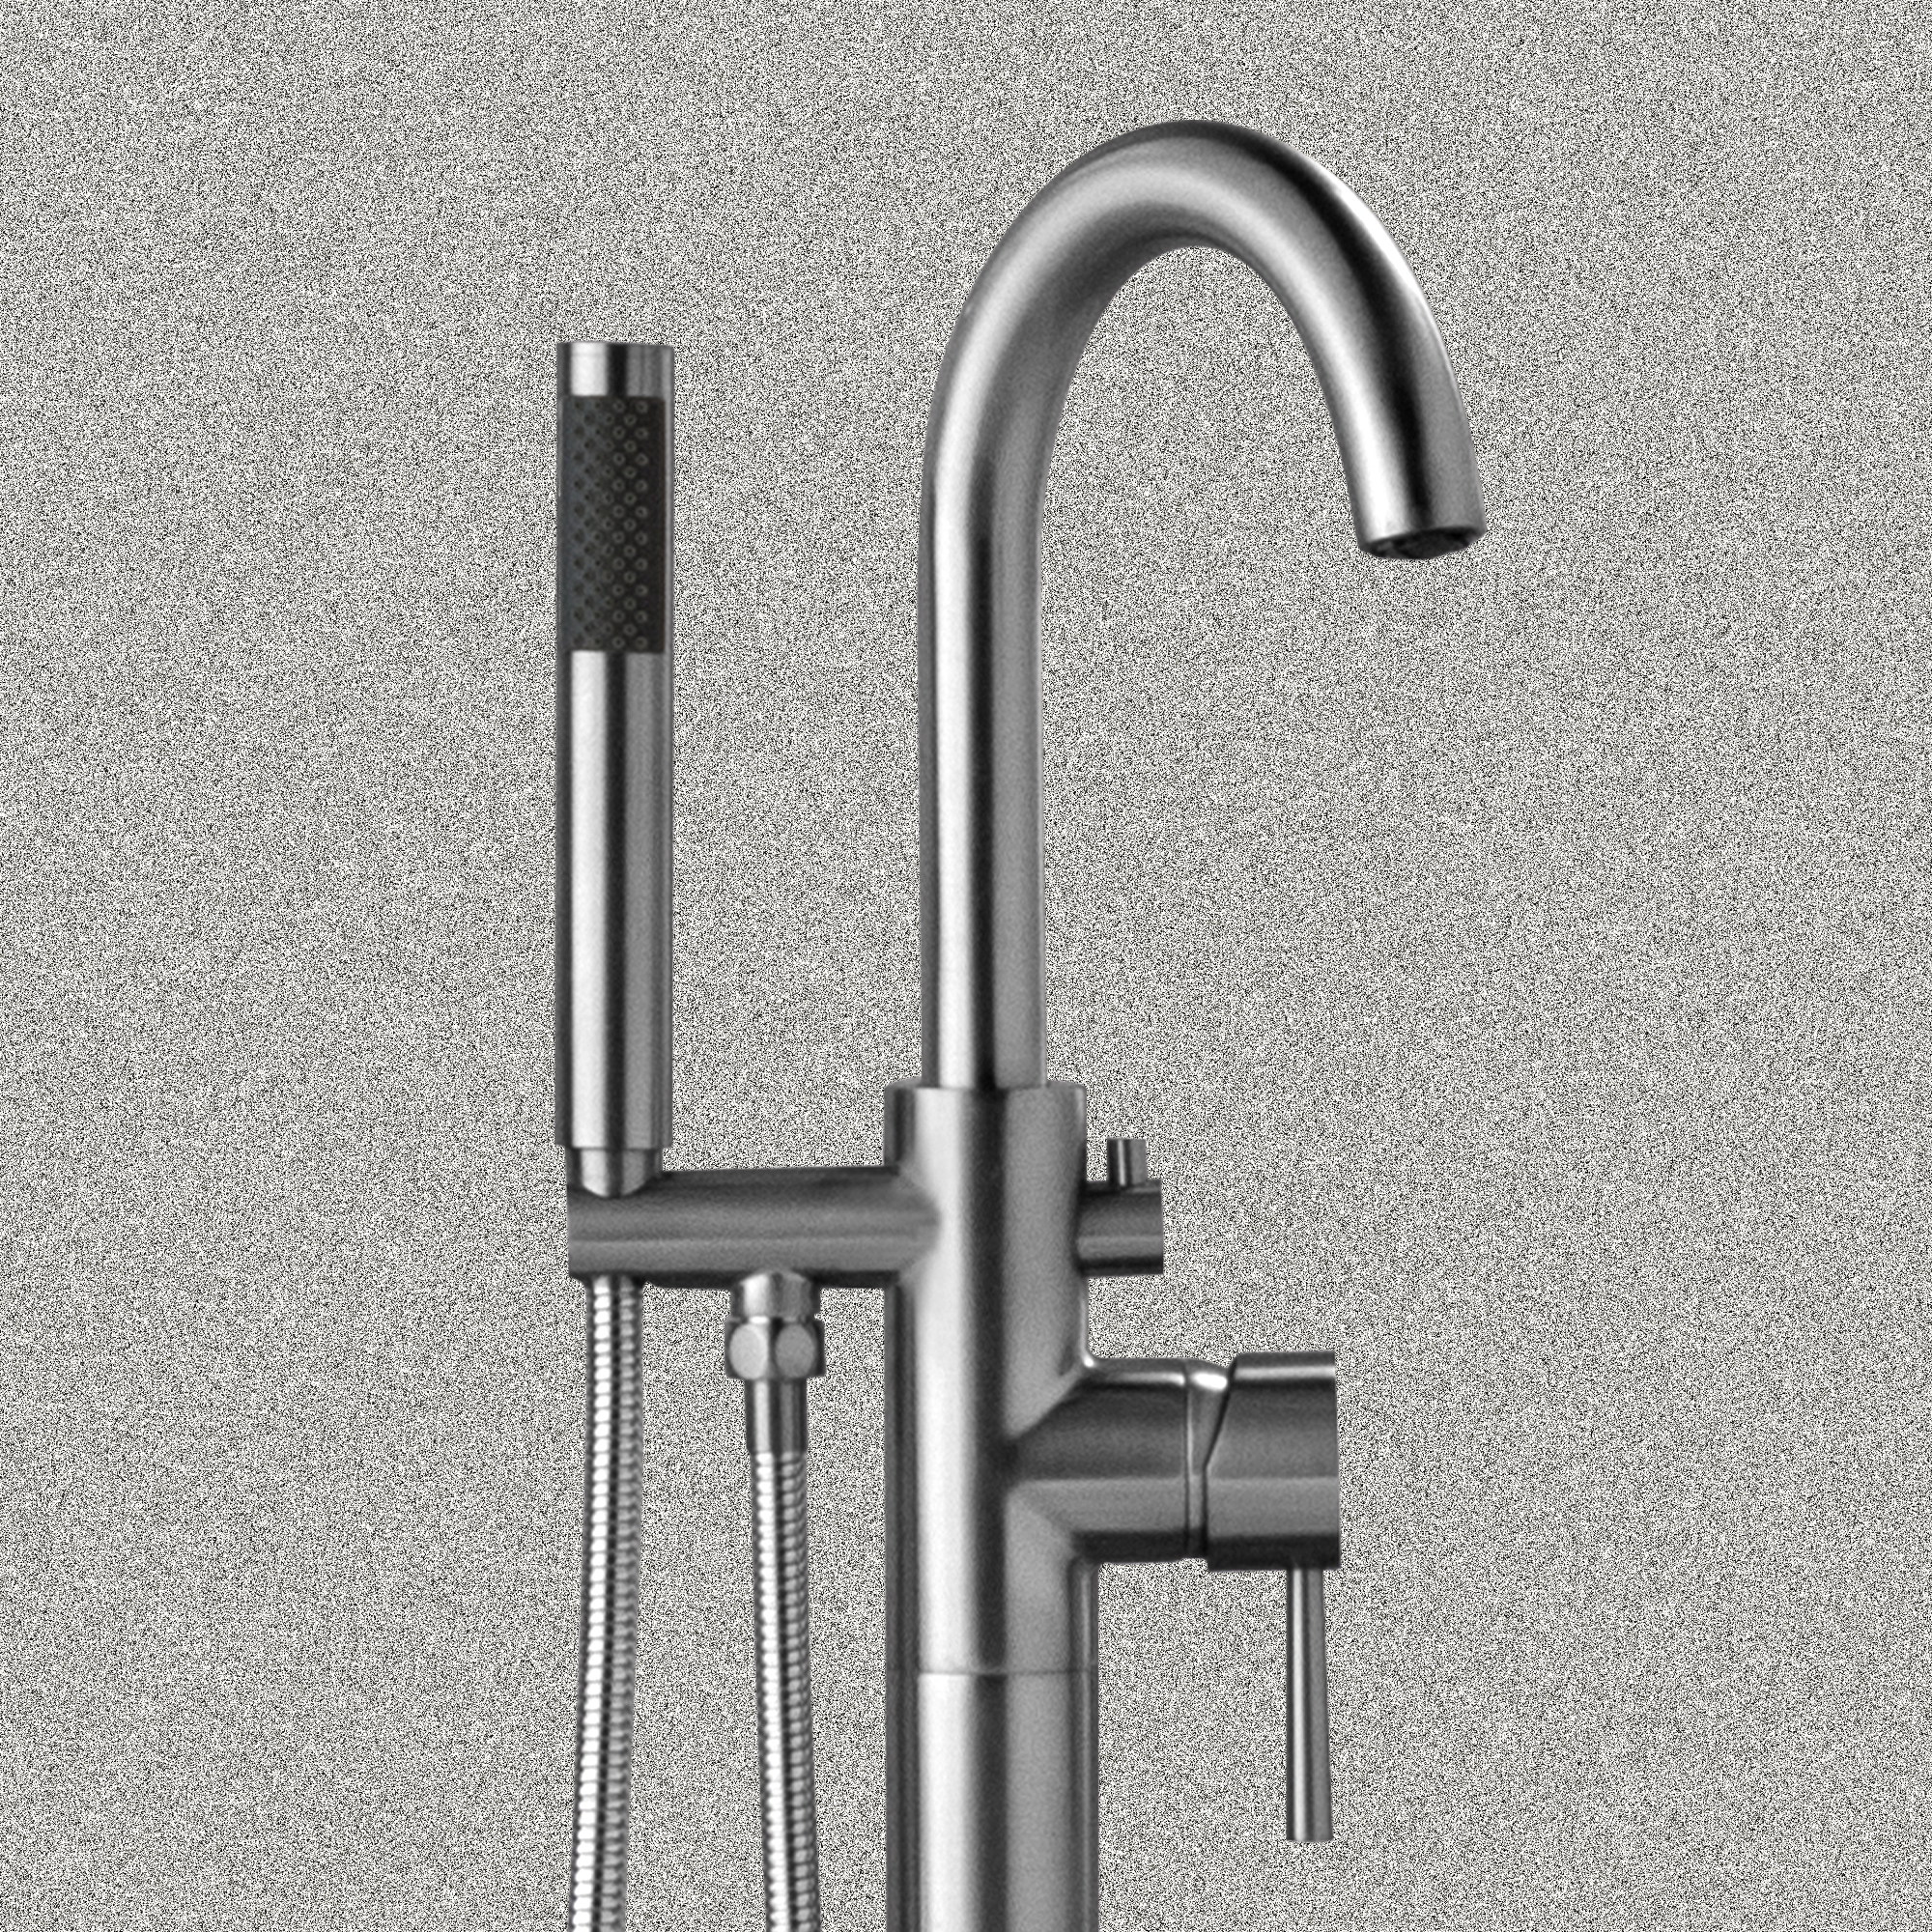  WOODBRIDGE F0024CHRD Contemporary Single Handle Floor Mount Freestanding Tub Filler Faucet with Cylinder Shape Hand shower in Polished Chrome Finish._17466